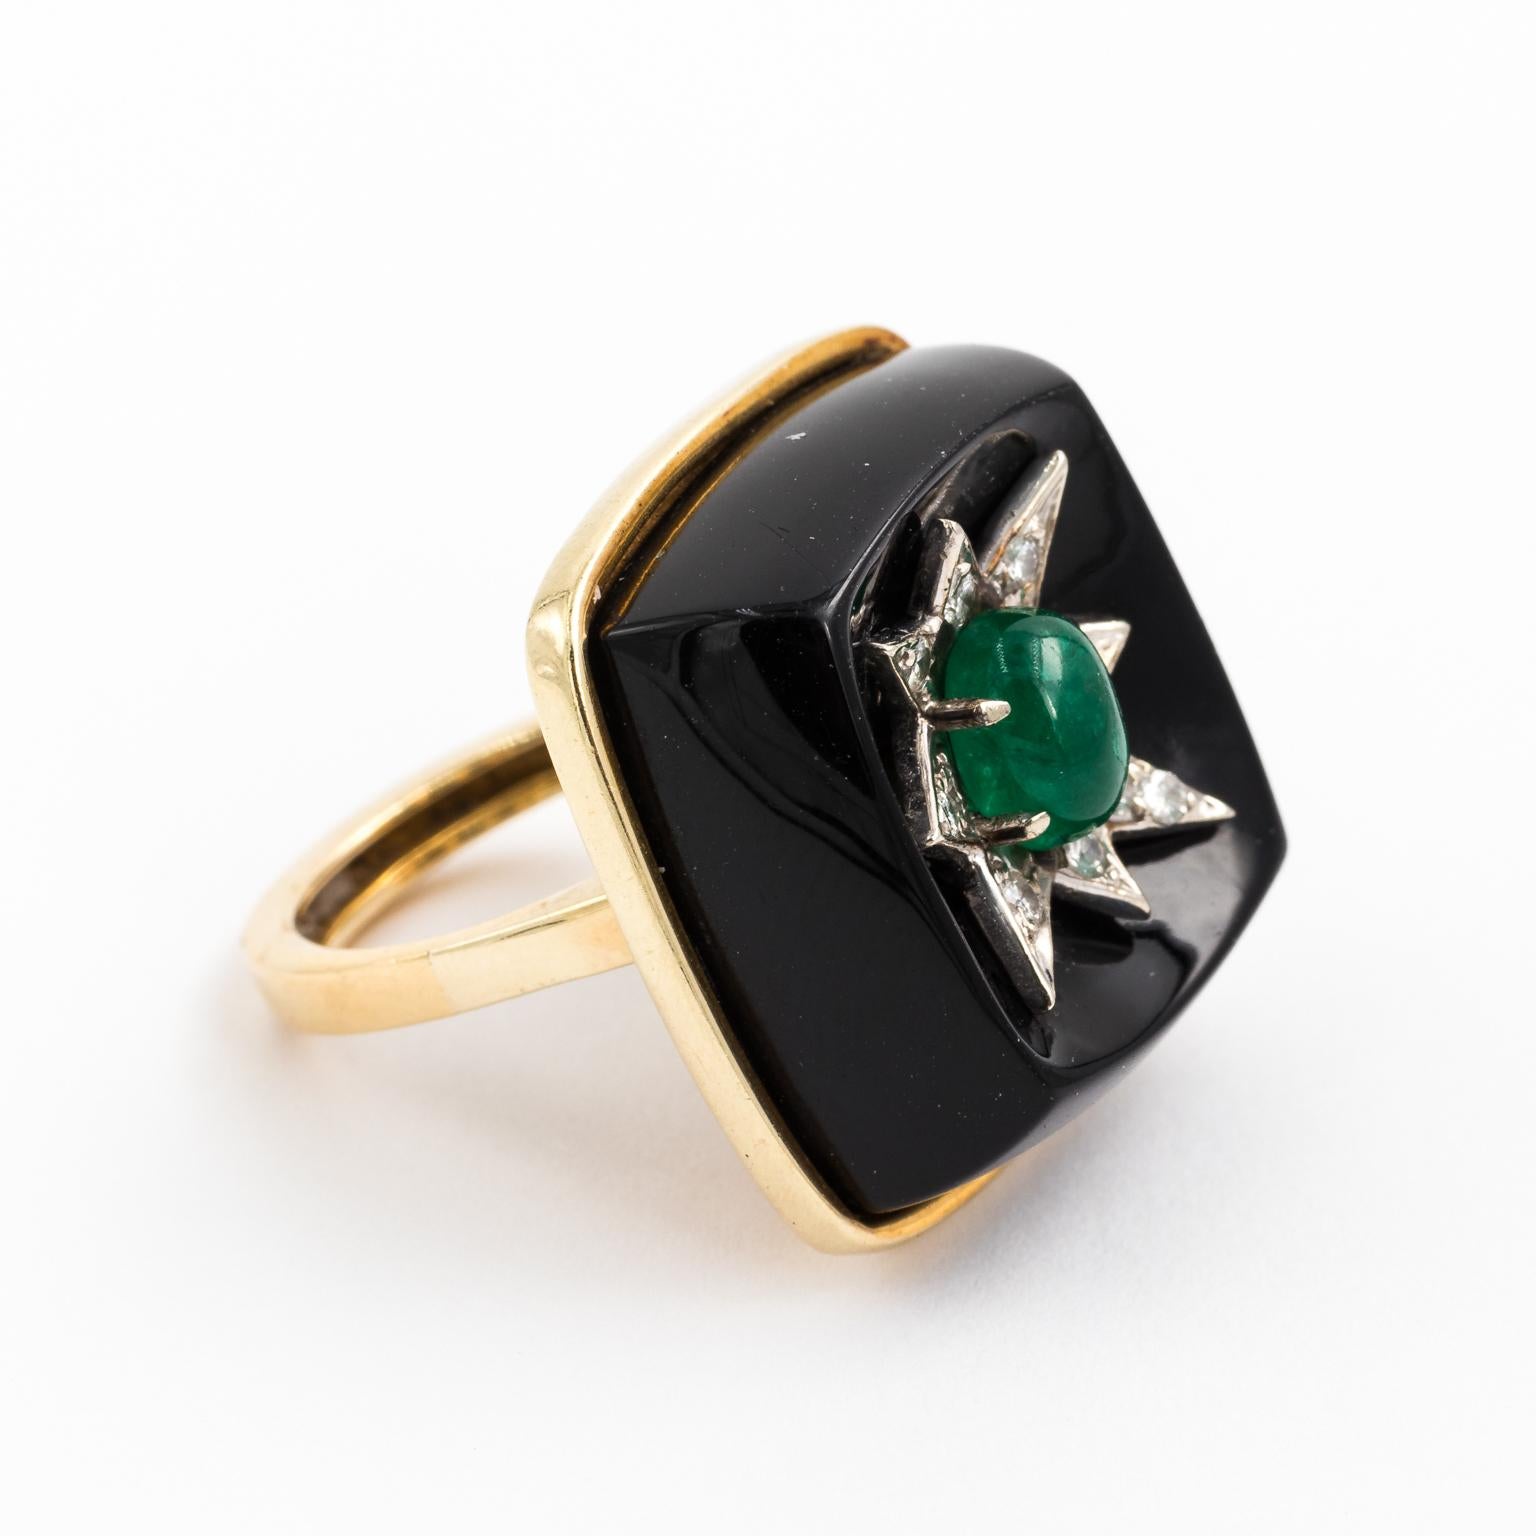 Art Deco 14 Karat Gold Onyx Cocktail Ring with Emerald and Diamond Star For Sale